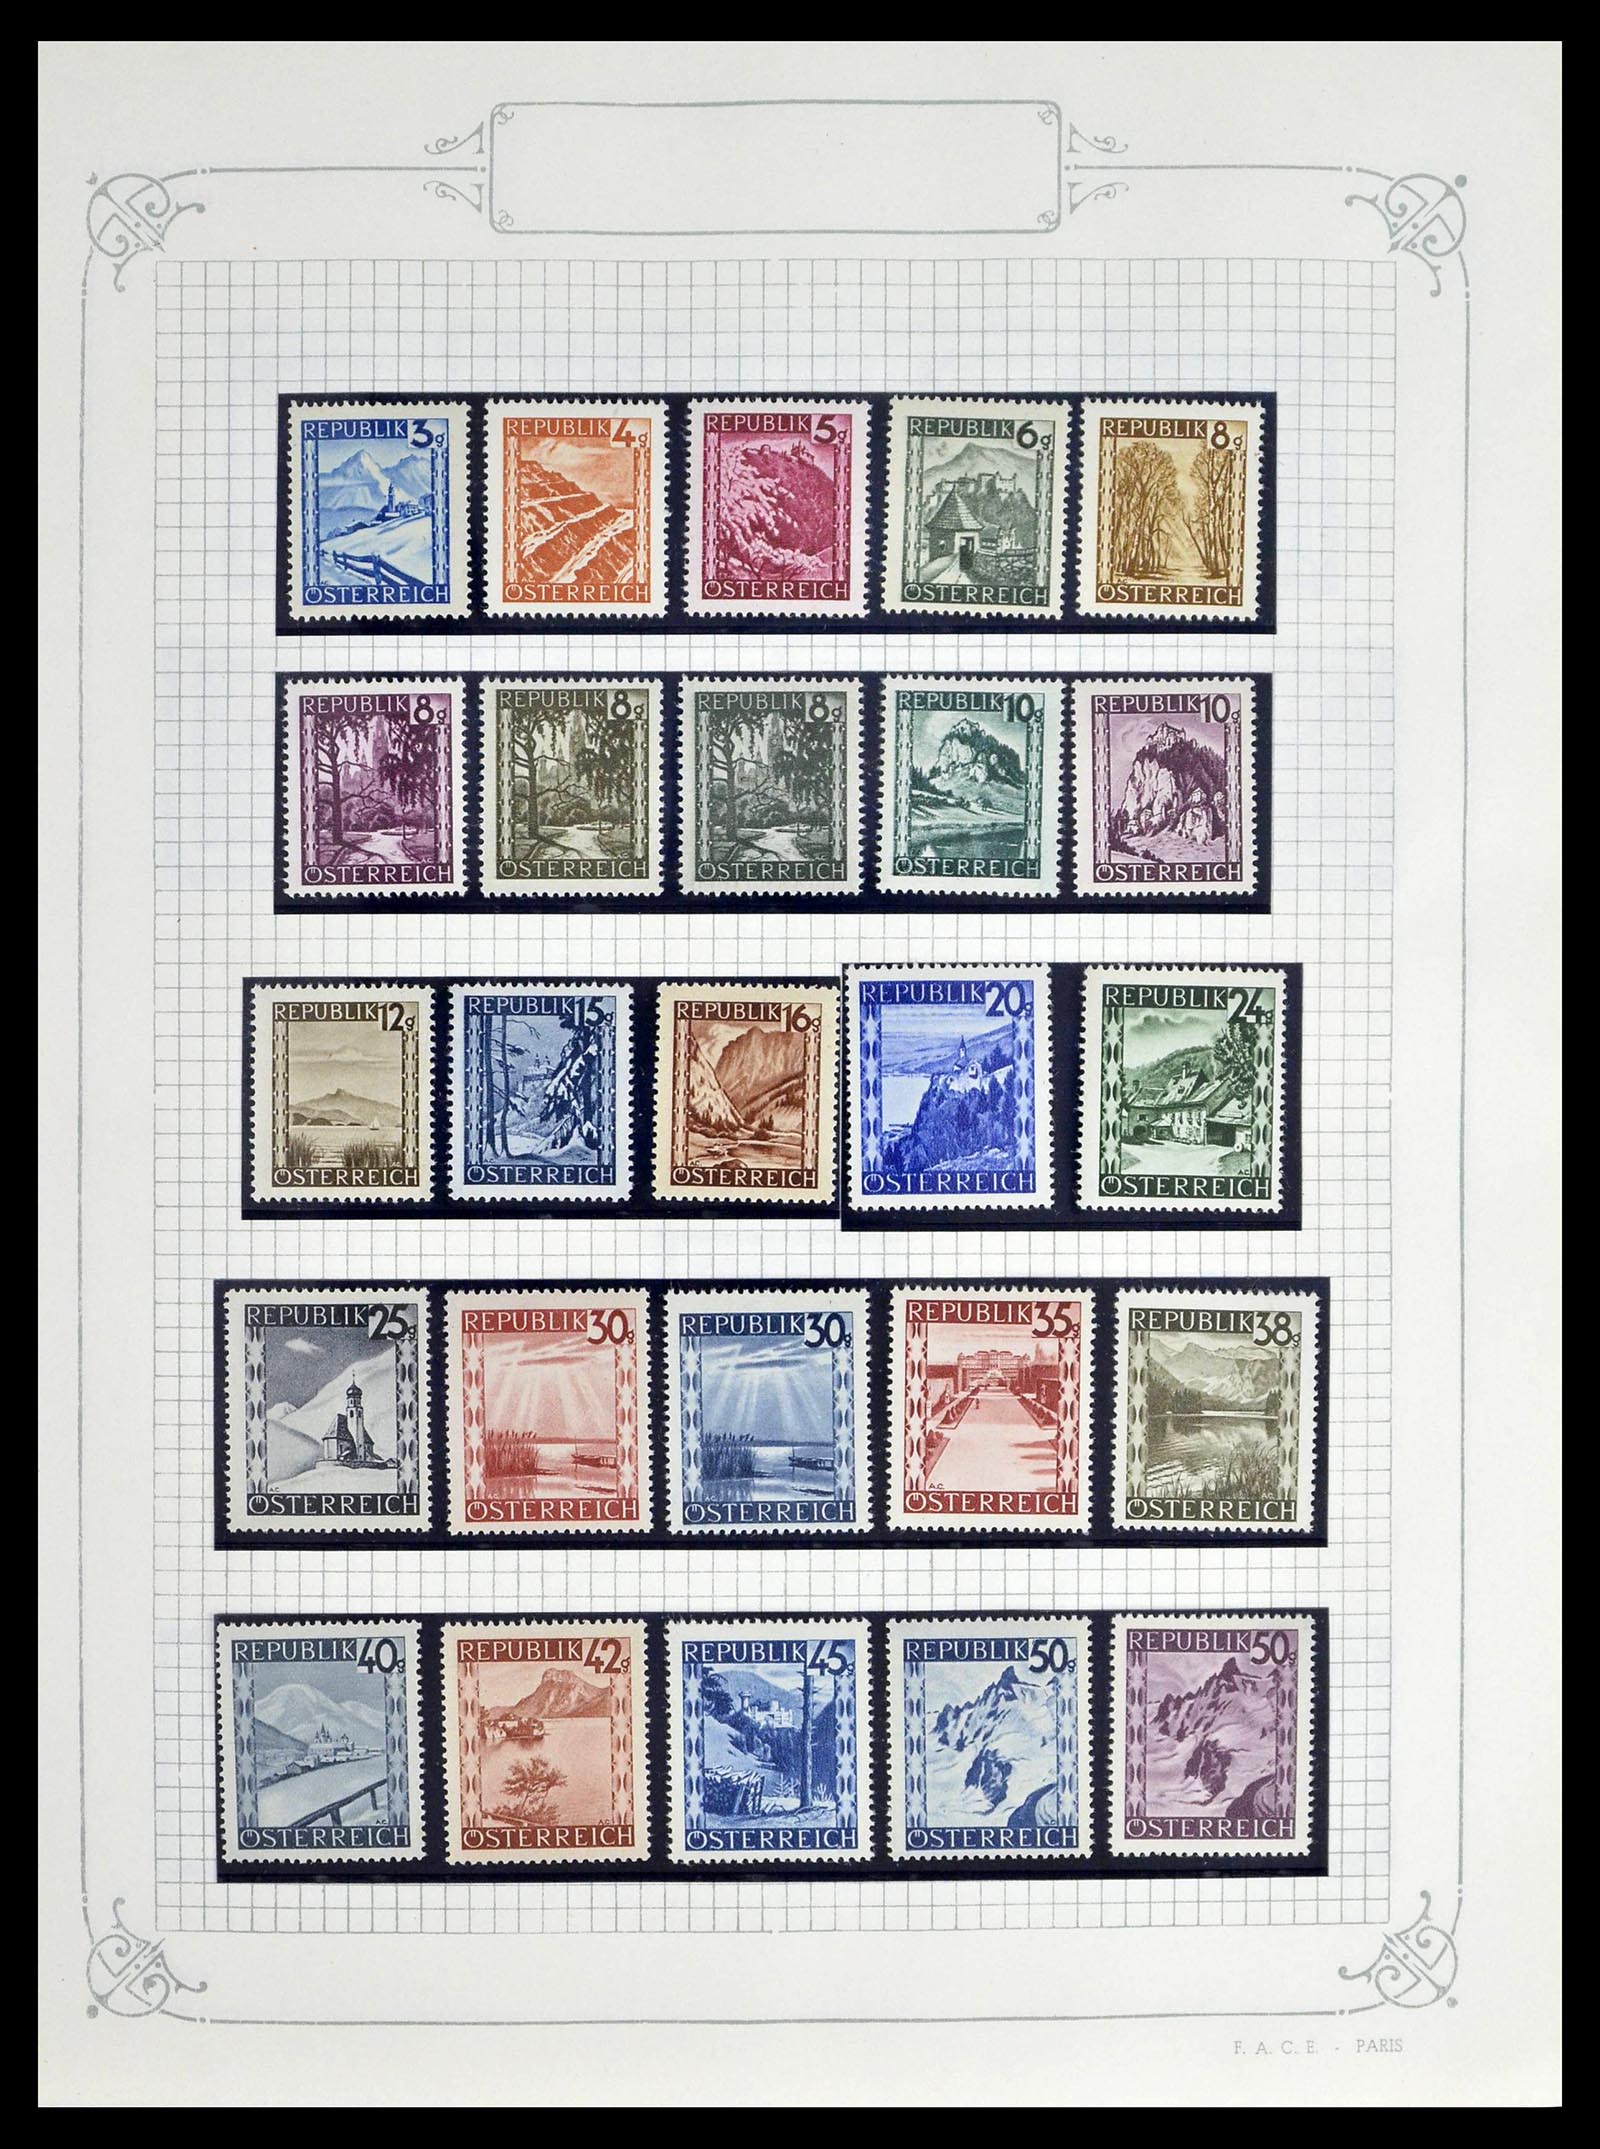 39276 0039 - Stamp collection 39276 Austria and territories 1850-1979.